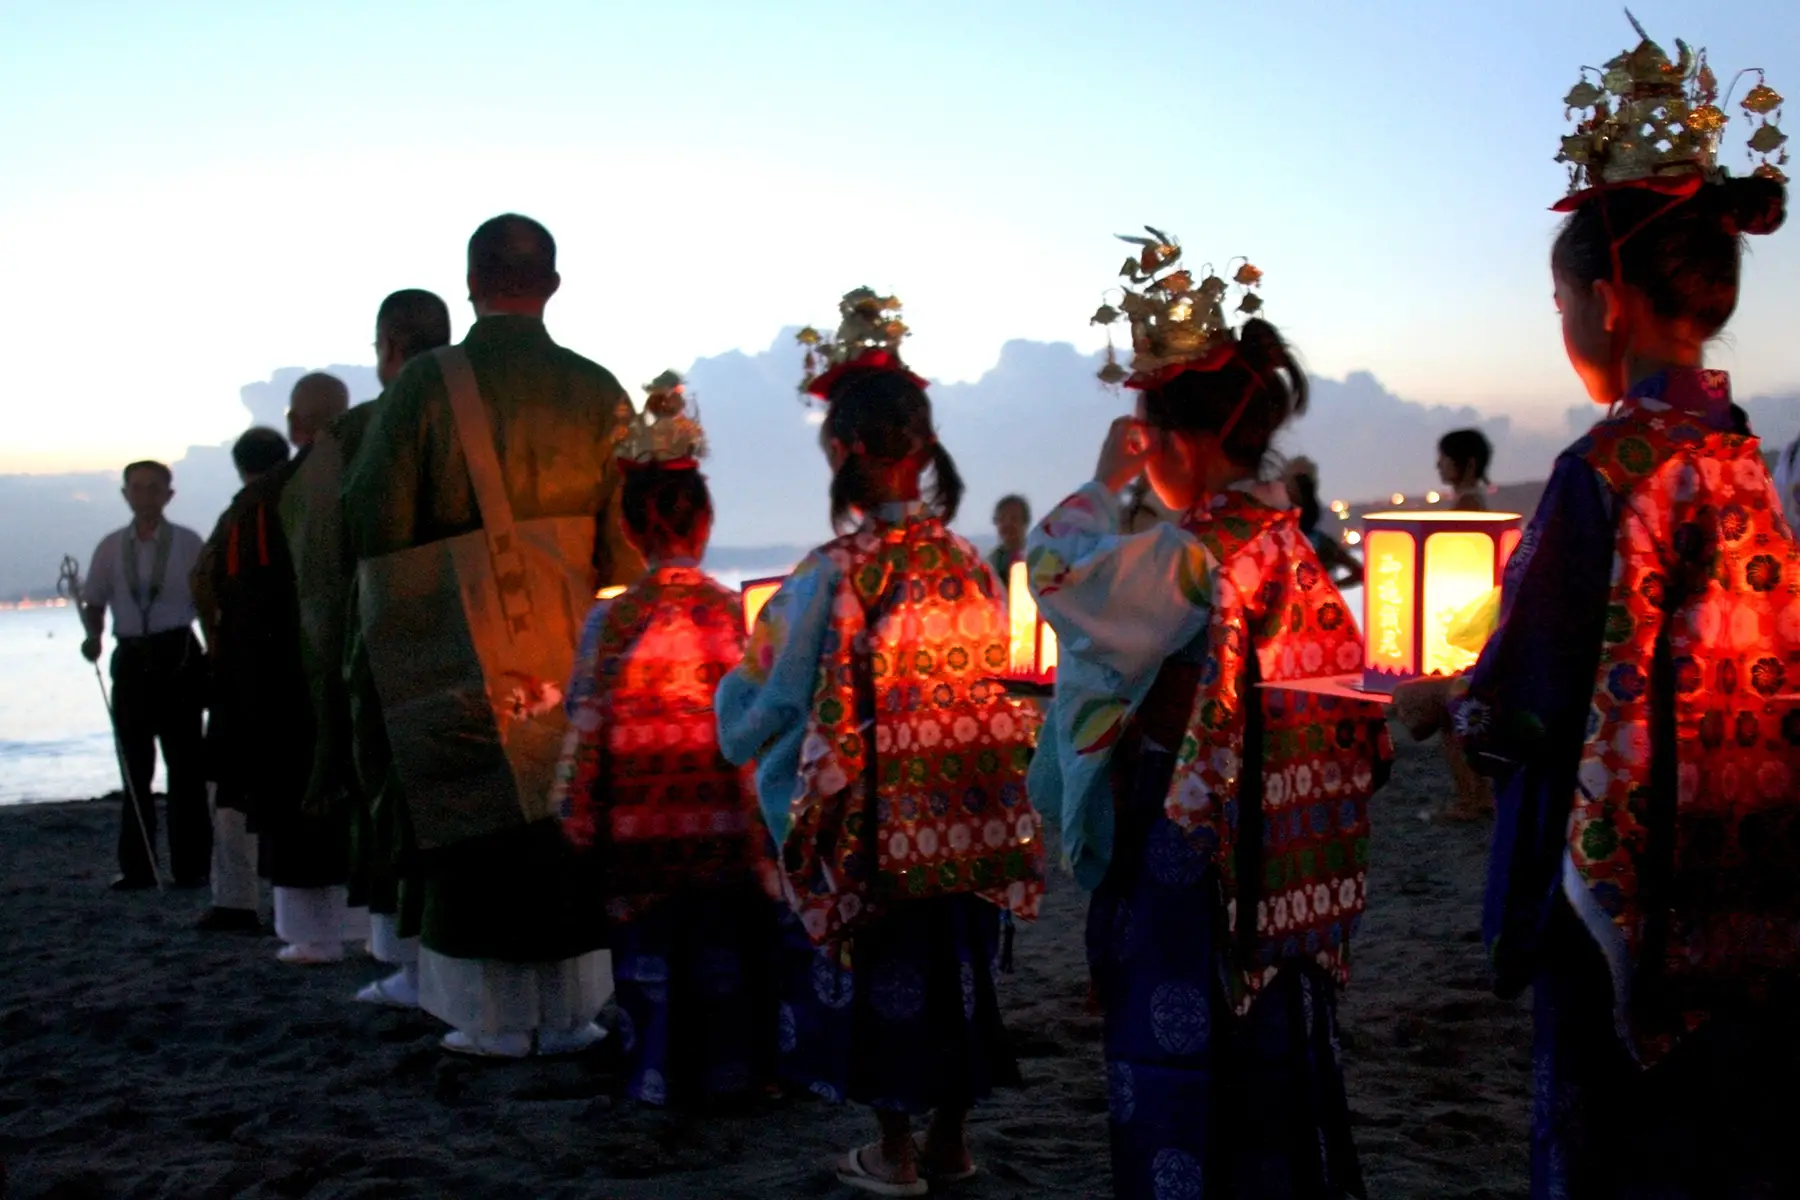 A group of adults and children - in traditional dress - celebrating the Obon festival, carrying lanterns, in Hayama, Kanagawa, Japan 